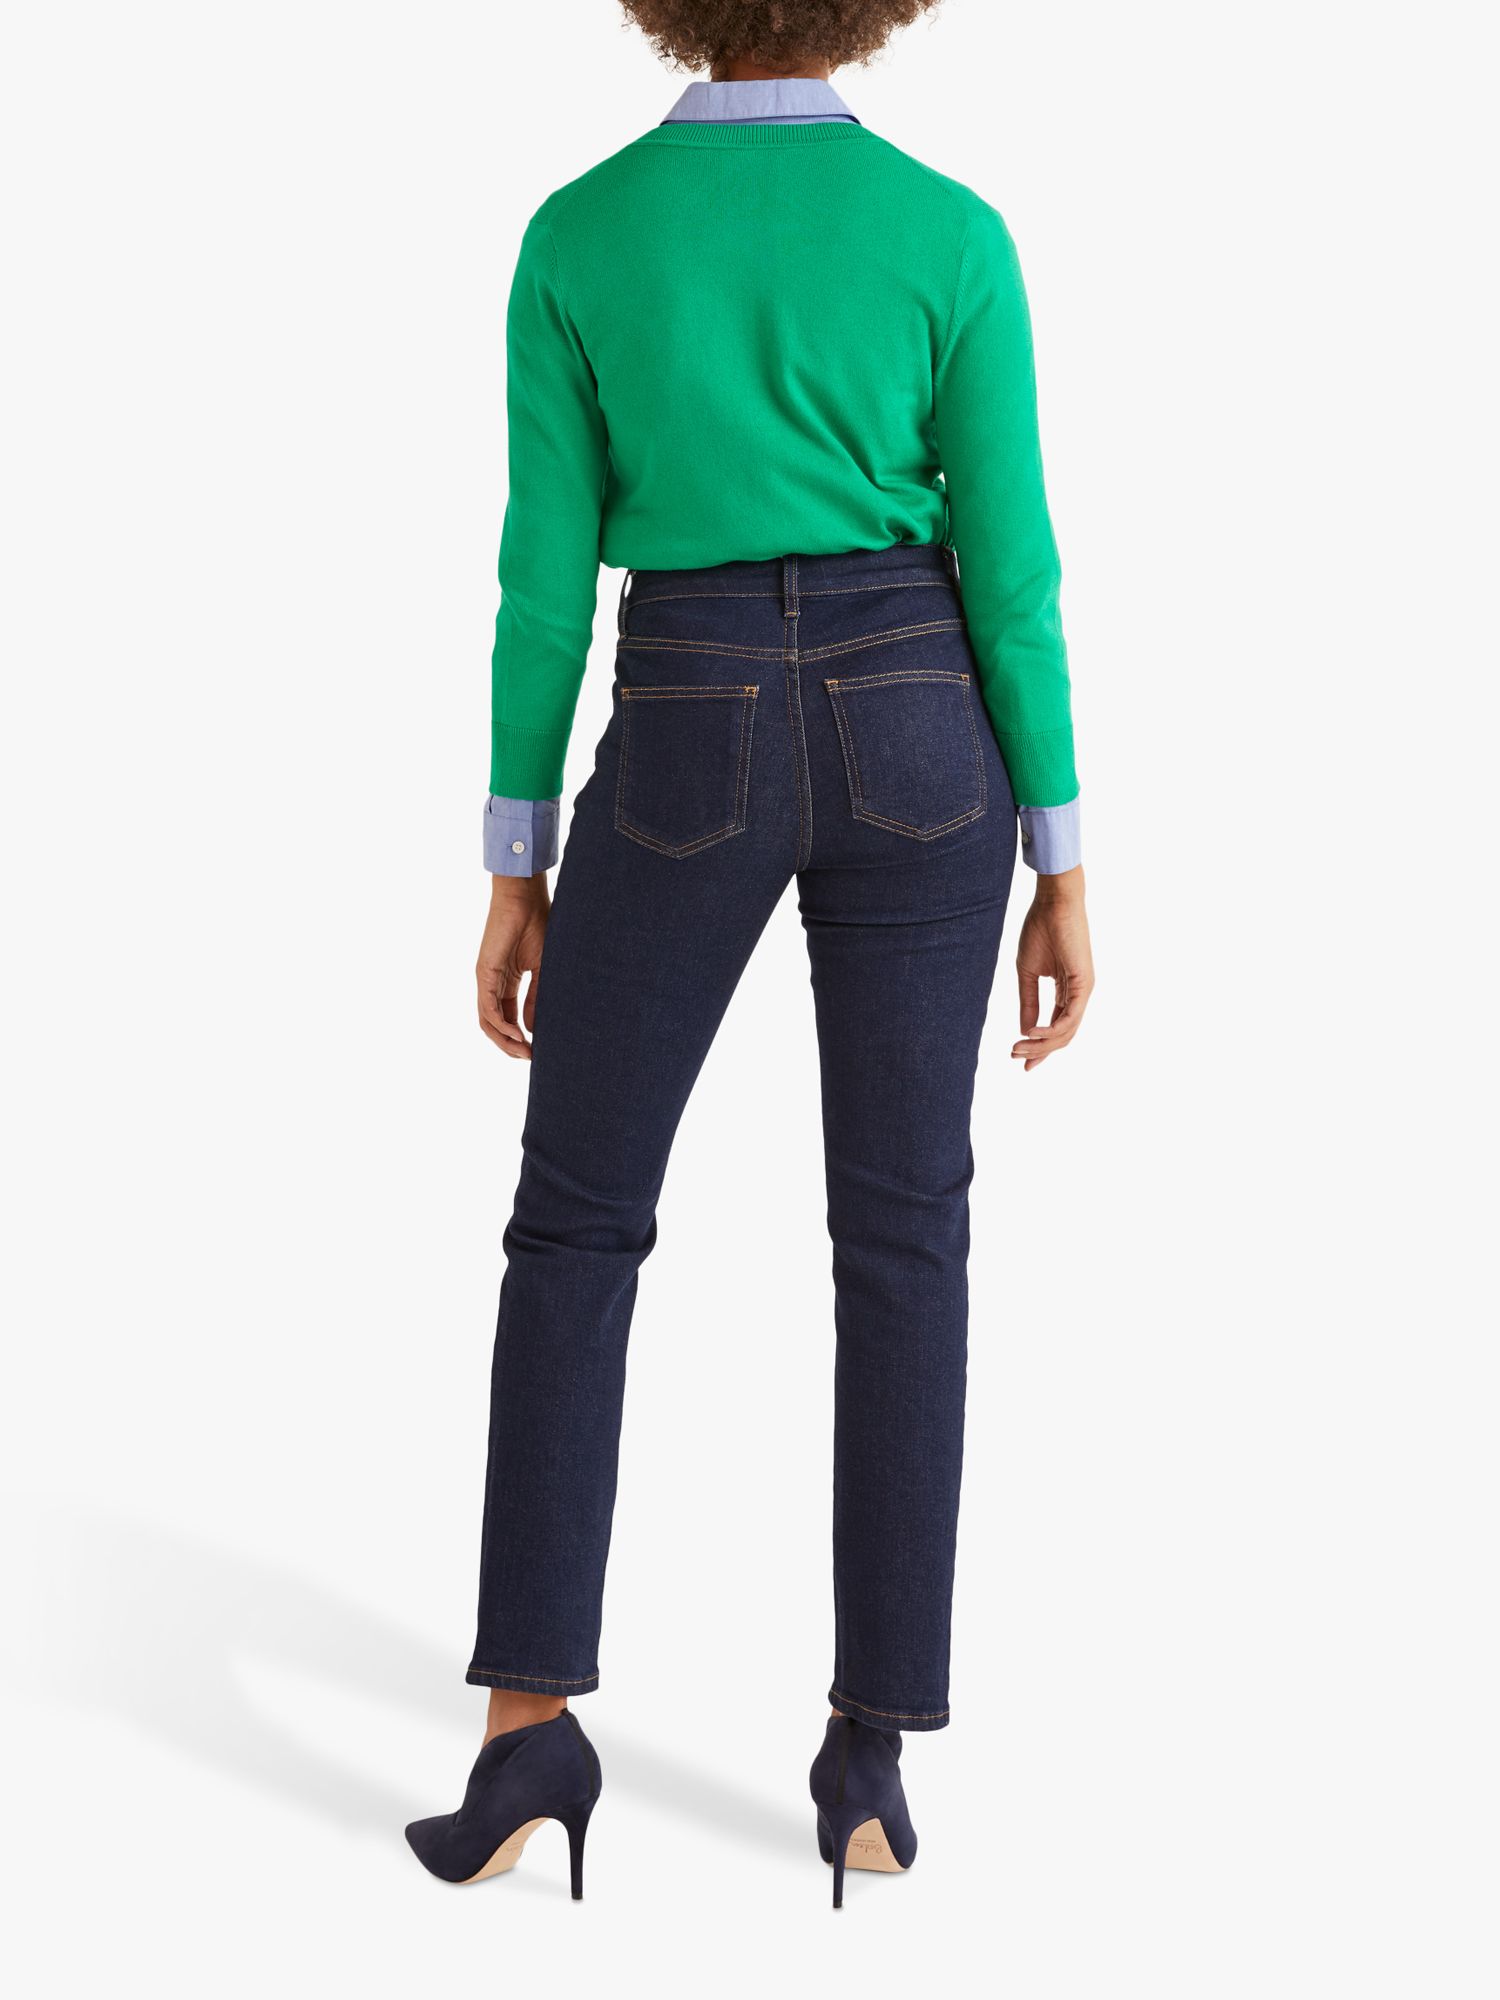 Boden Slim-Fit Straight Jeans, Indigo at John Lewis & Partners